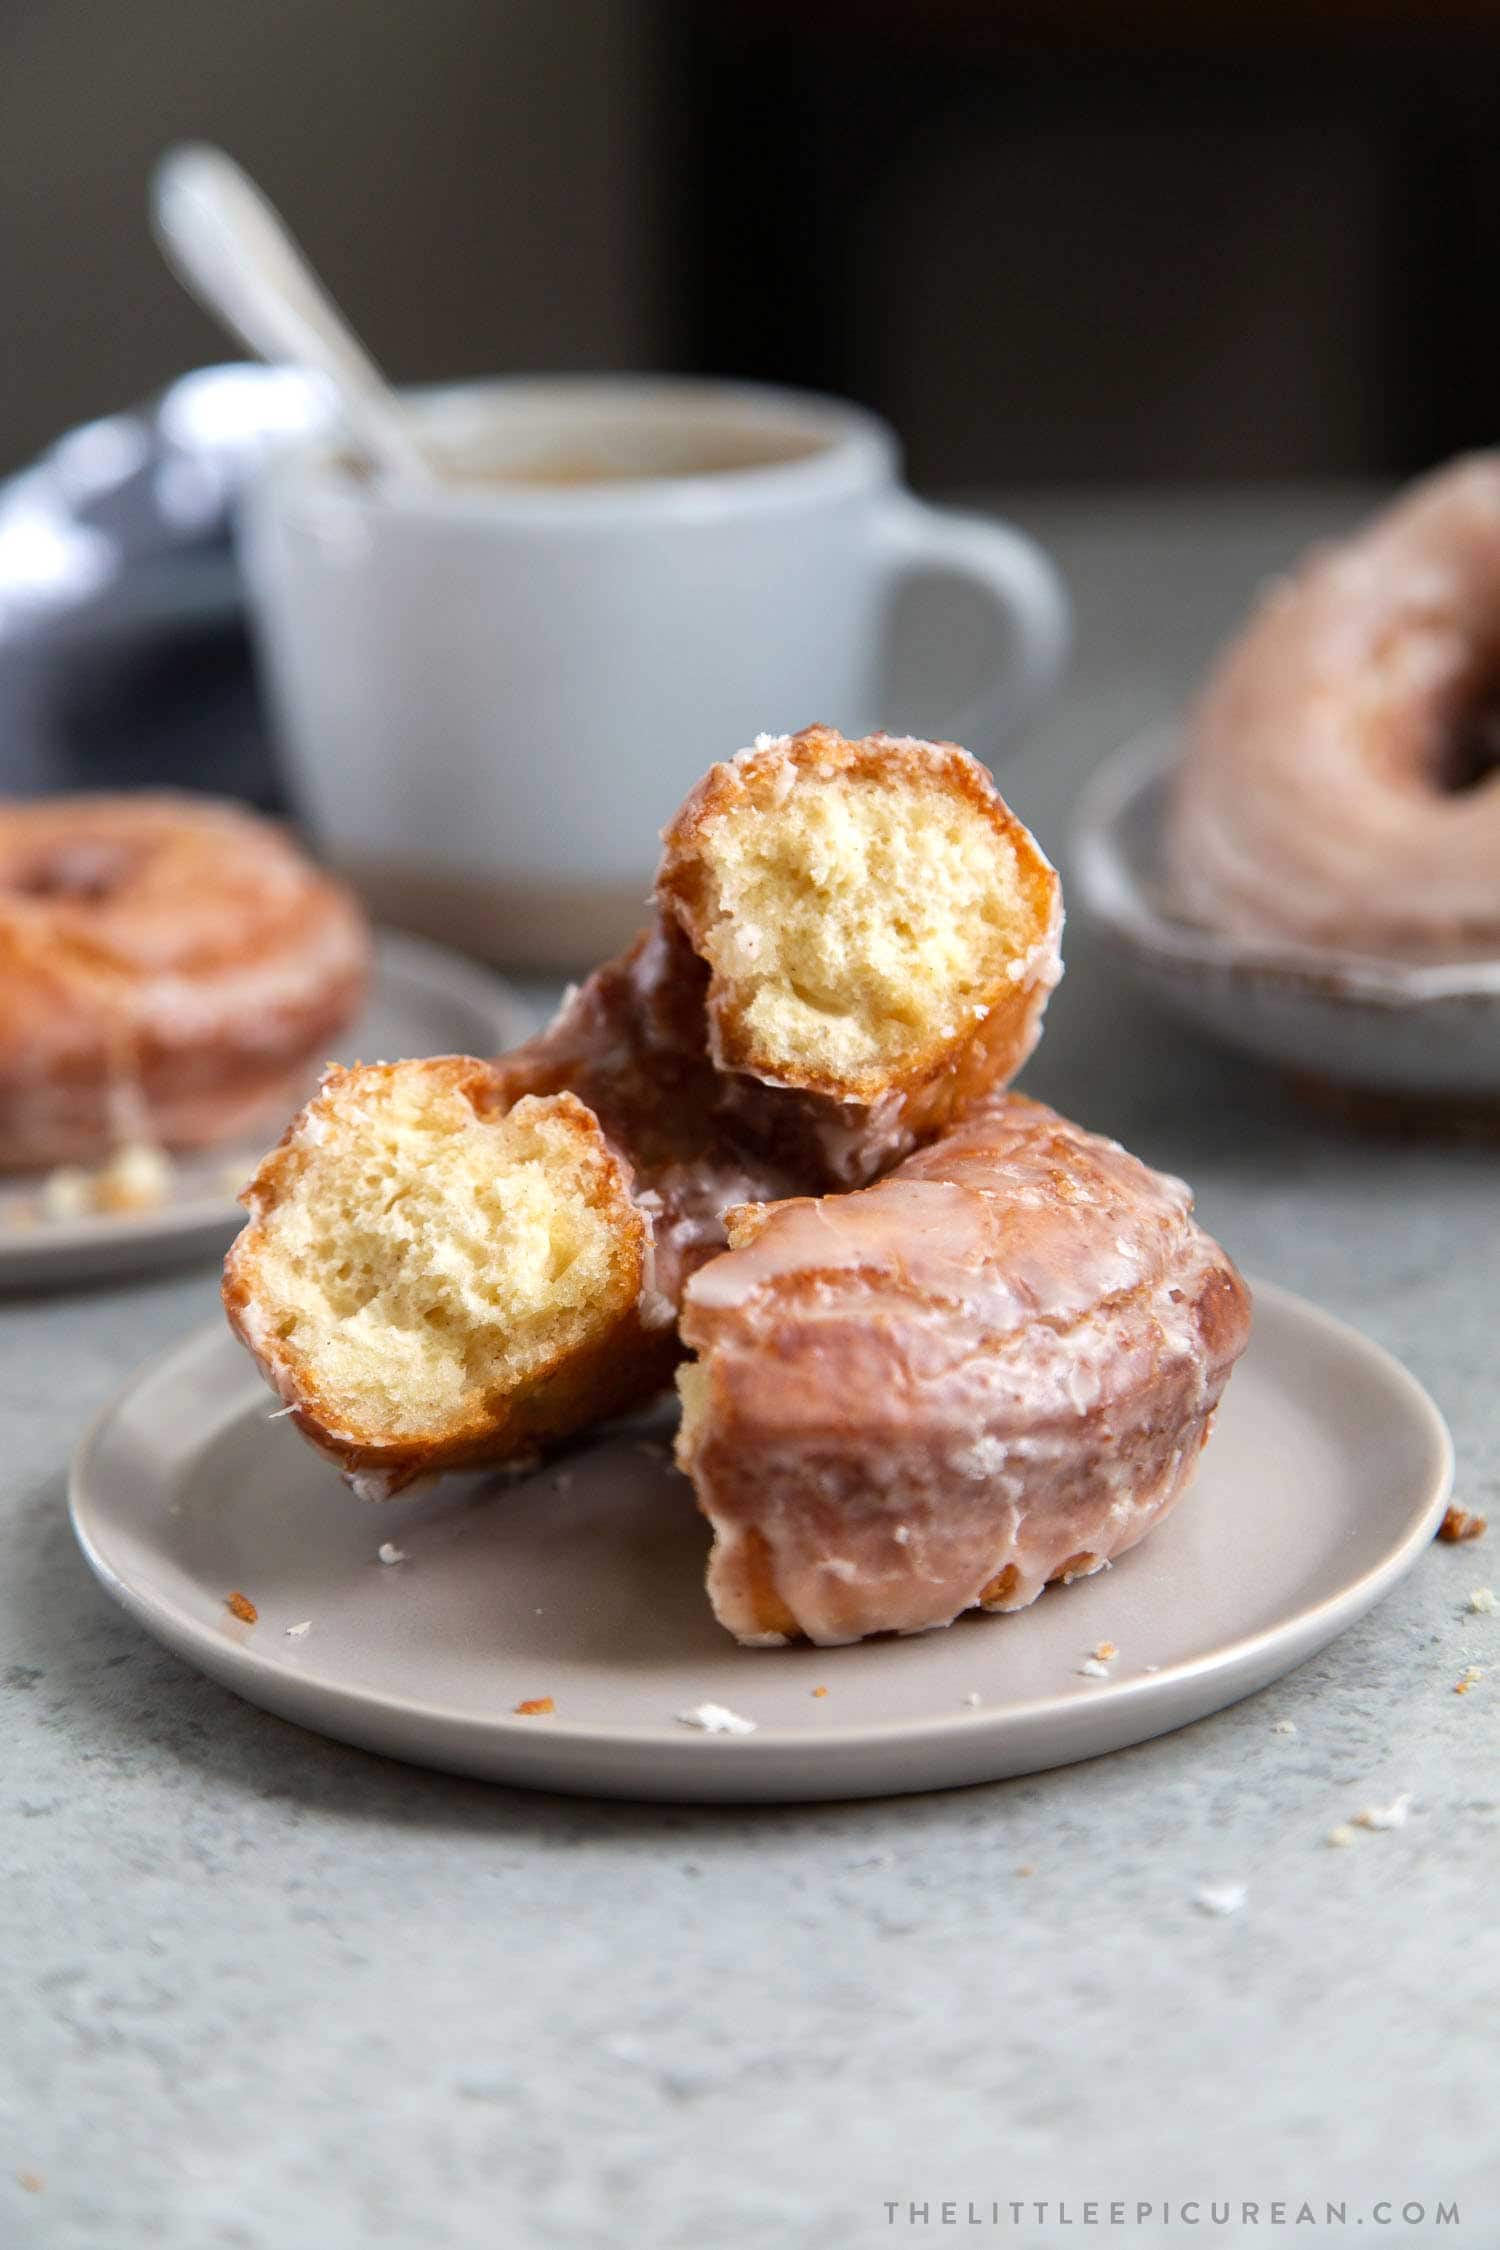 Brown Butter Old Fashioned Donuts. These homemade fried cake donuts are brown butter glazed.